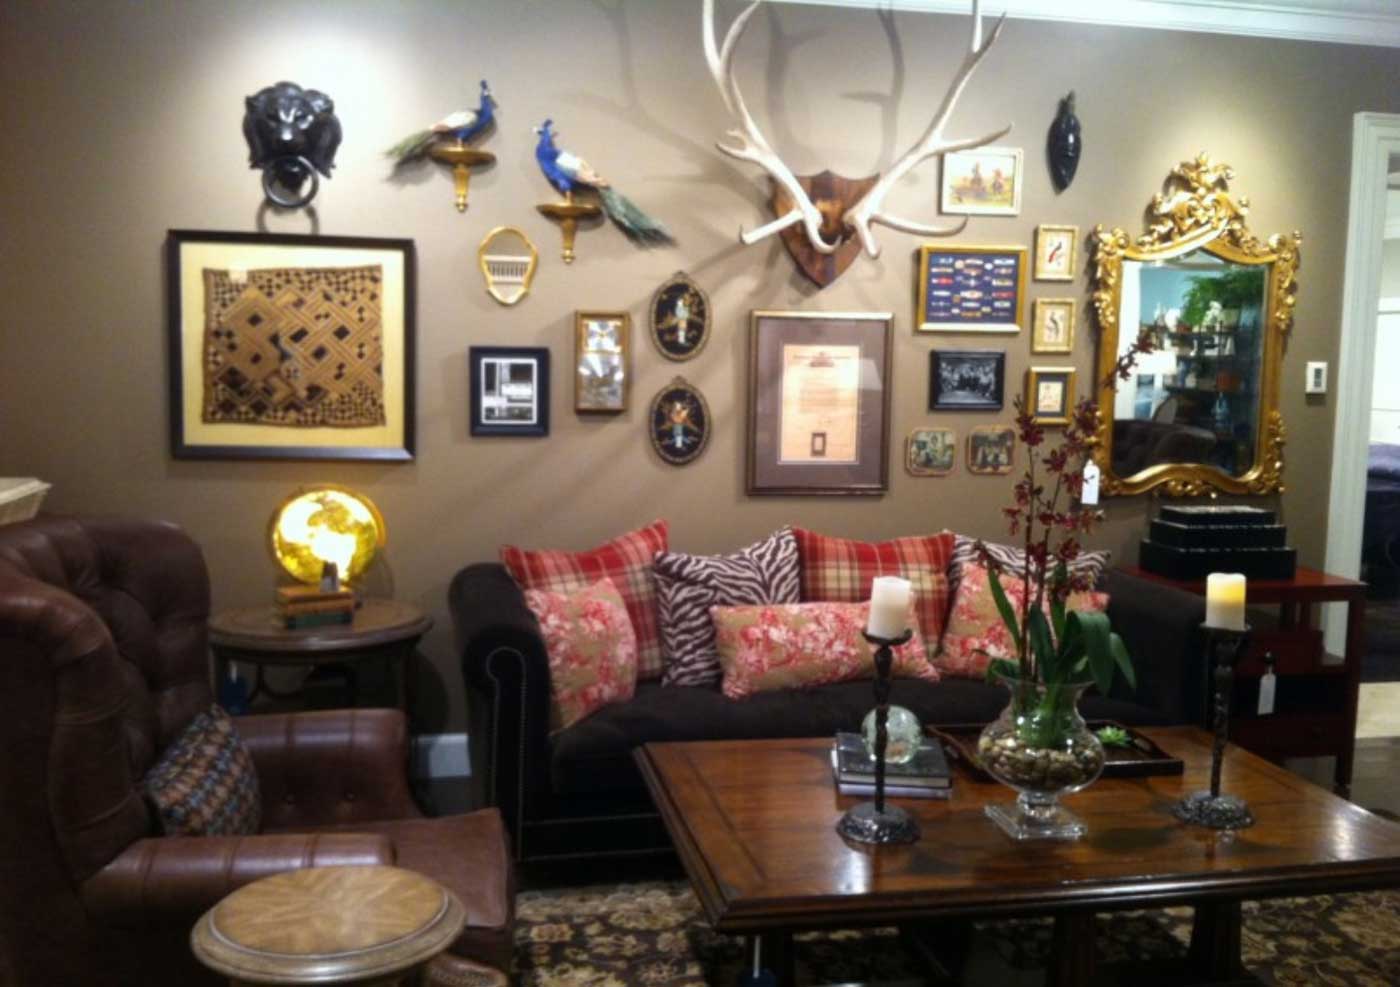 Hunting Themed Sets Masculine Hunting Themed Living Room Sets Home Decor For Small House Design Ideas With Traditional Dark Brown Coffee Table Design And Sweet Flower Vase Plus Charming Brown Colored Sofa Bed Idea Living Room Beautiful Living Room Sets As Suitable Furniture